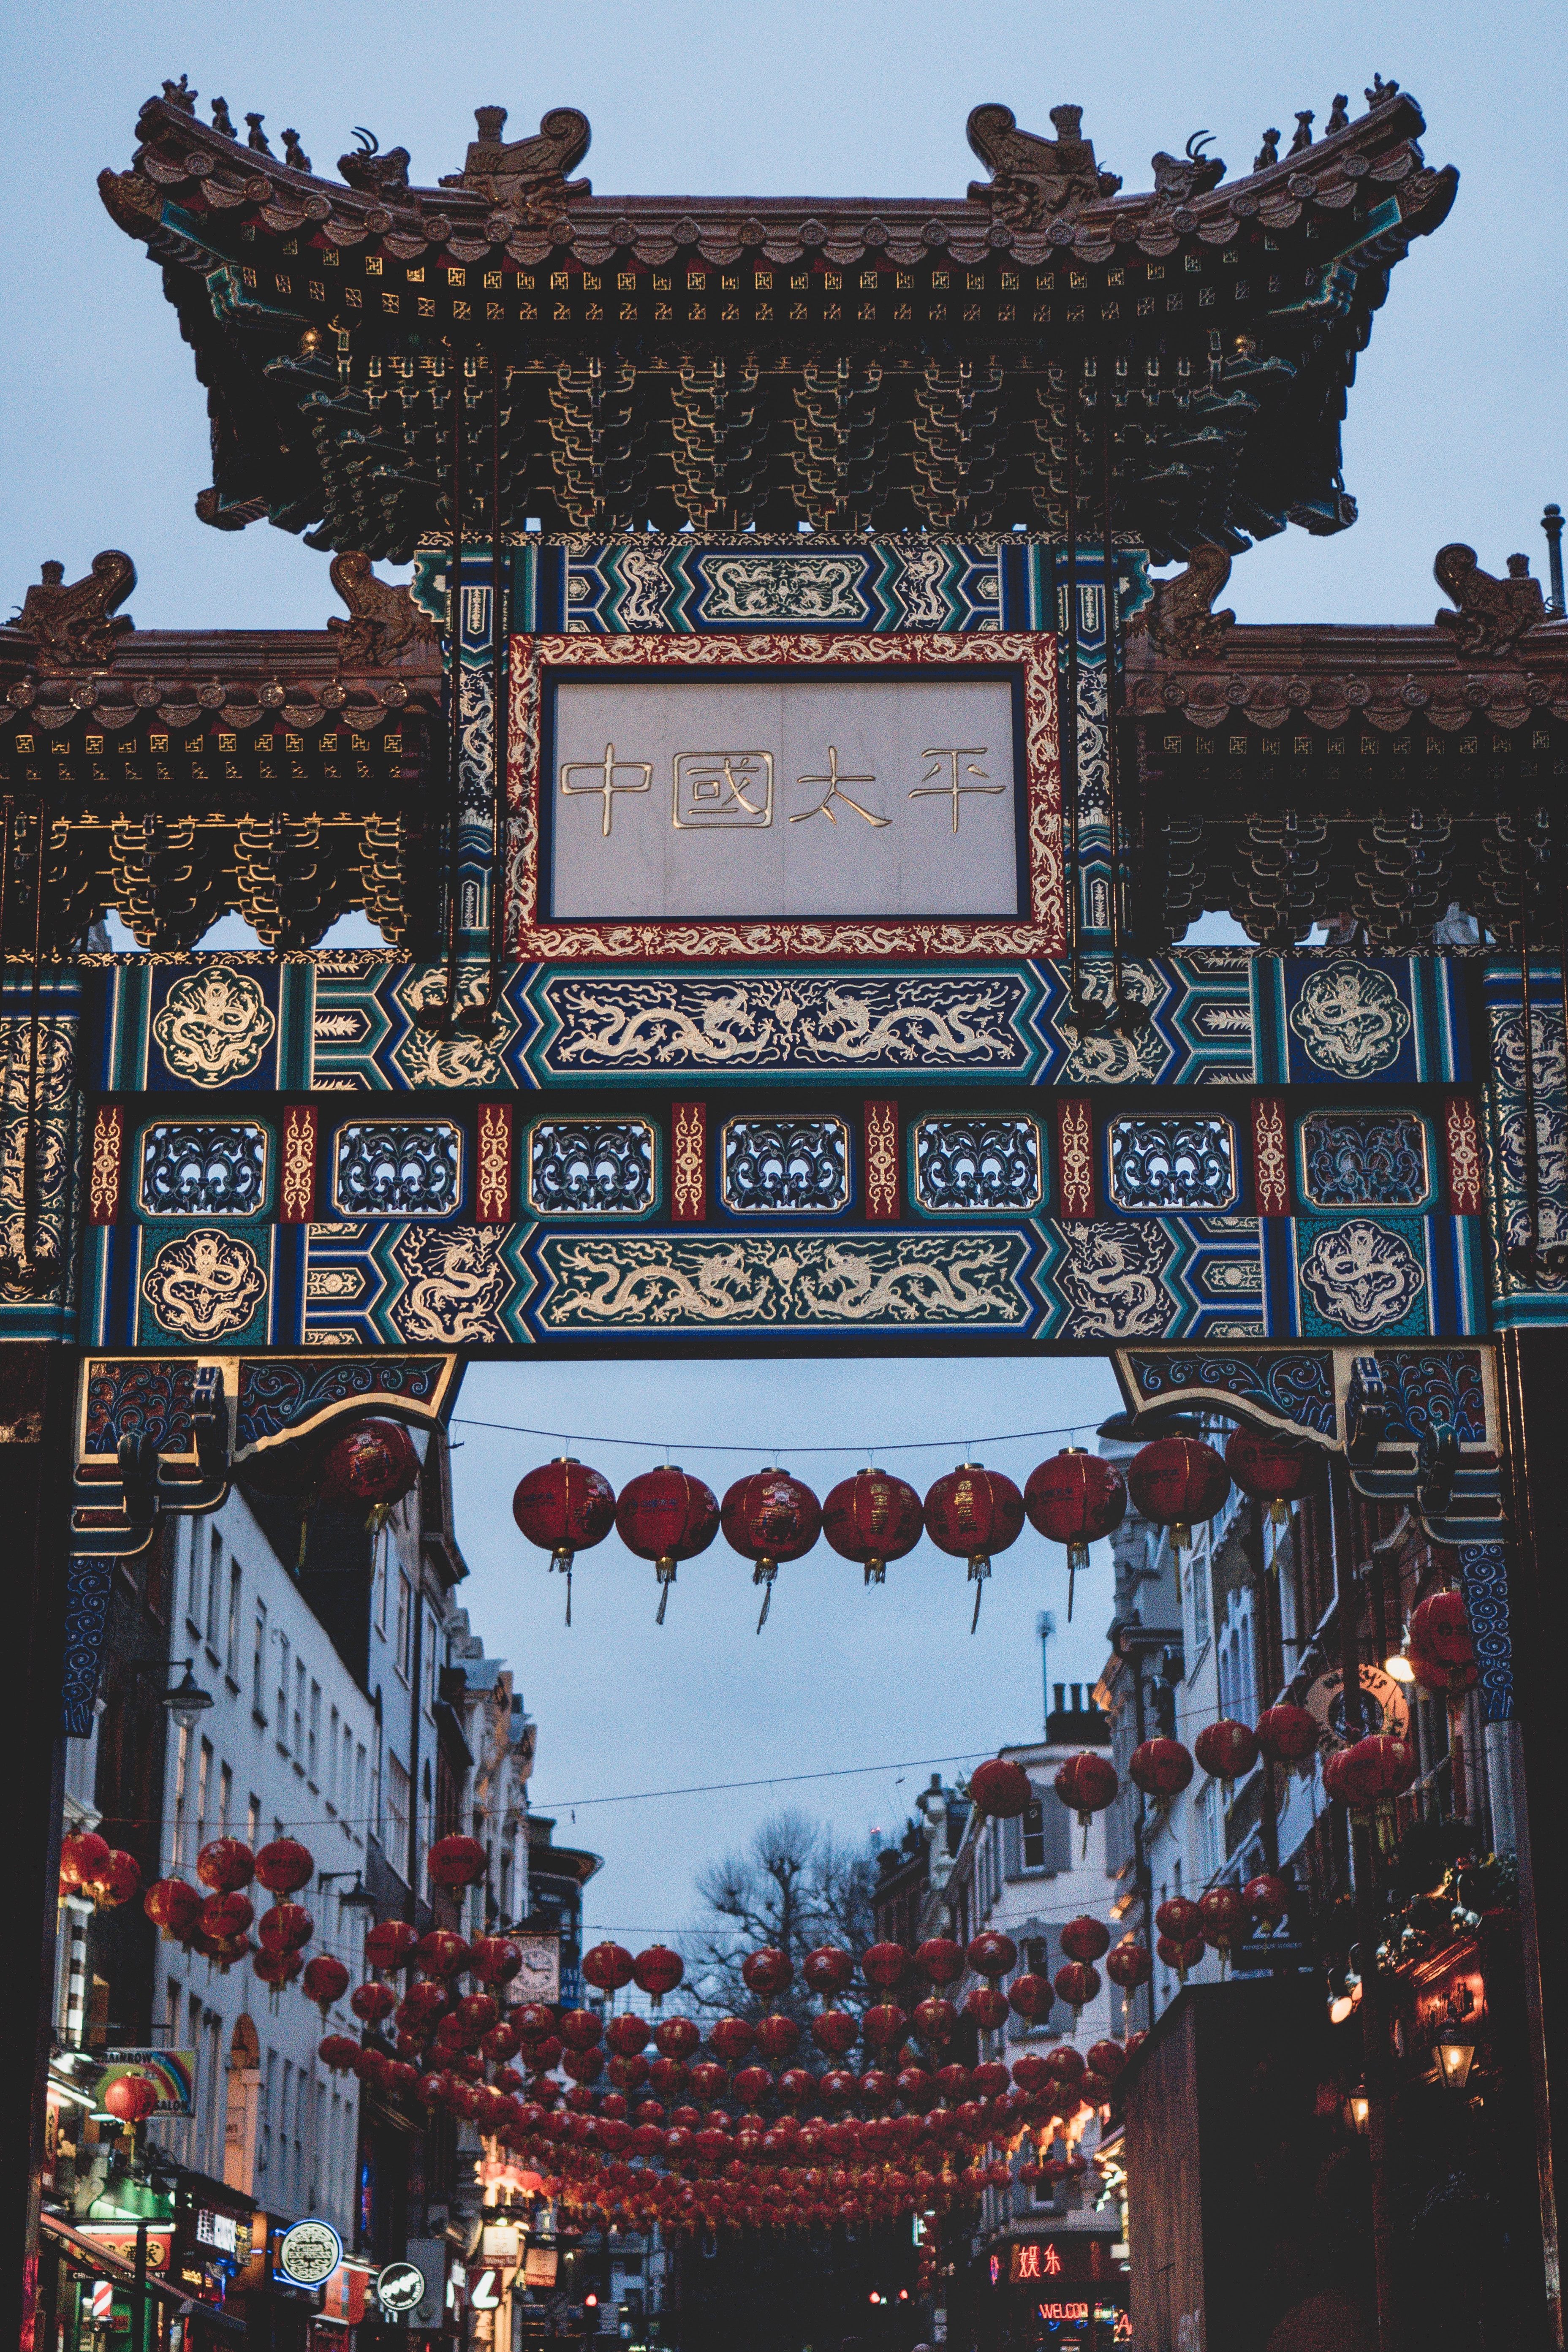 China was my favorite trip Photo by Paul Gilmore on Unsplash